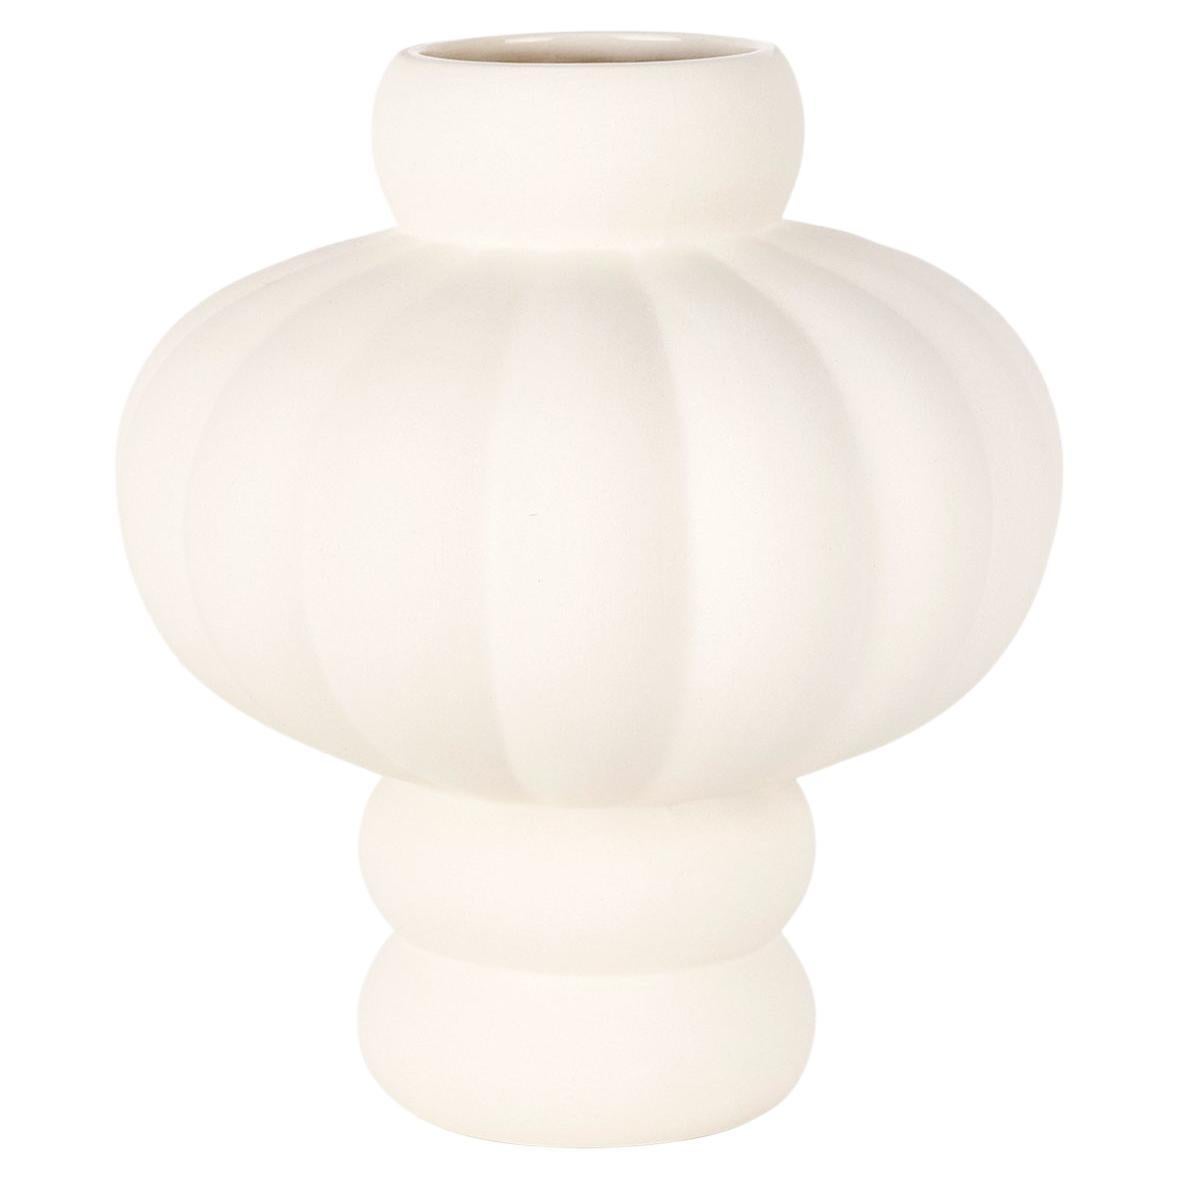 Balloon vase 03 raw white
Handmade ceramic vase made by Danish artist Louise Roe.

Measure: Ø 13-35 / H 40 cm

About the artist:
Louise Roe is a Copenhagen based interior design brand, established in 2010.
Each object is personally sketched